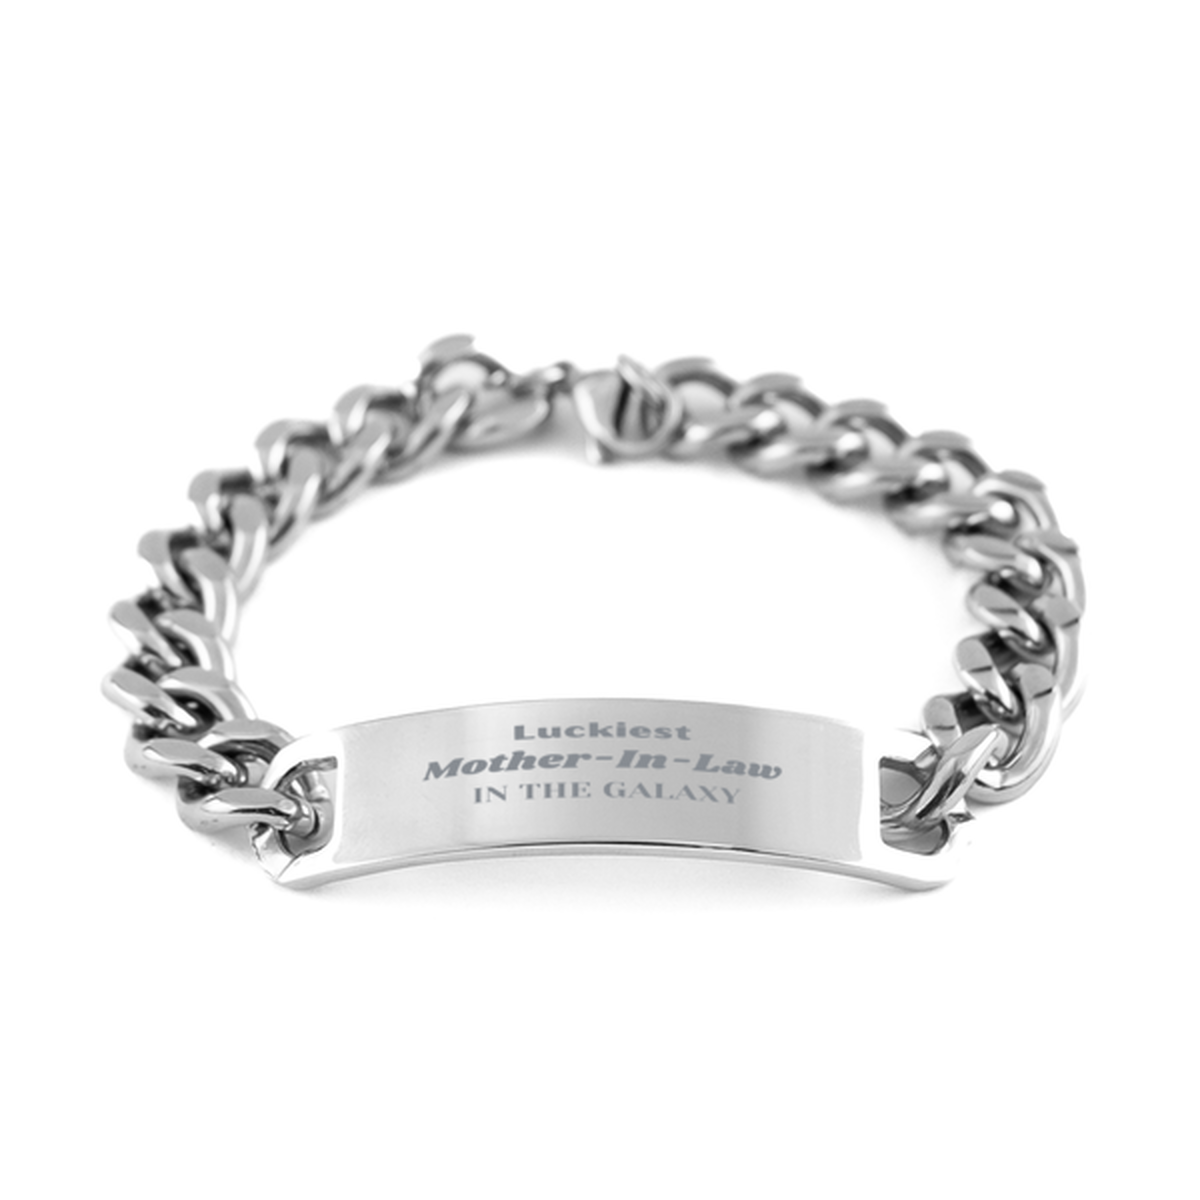 Luckiest Mother-In-Law in the Galaxy, To My Mother-In-Law Engraved Gifts, Christmas Mother-In-Law Cuban Chain Stainless Steel Bracelet Gifts, X-mas Birthday Unique Gifts For Mother-In-Law Men Women